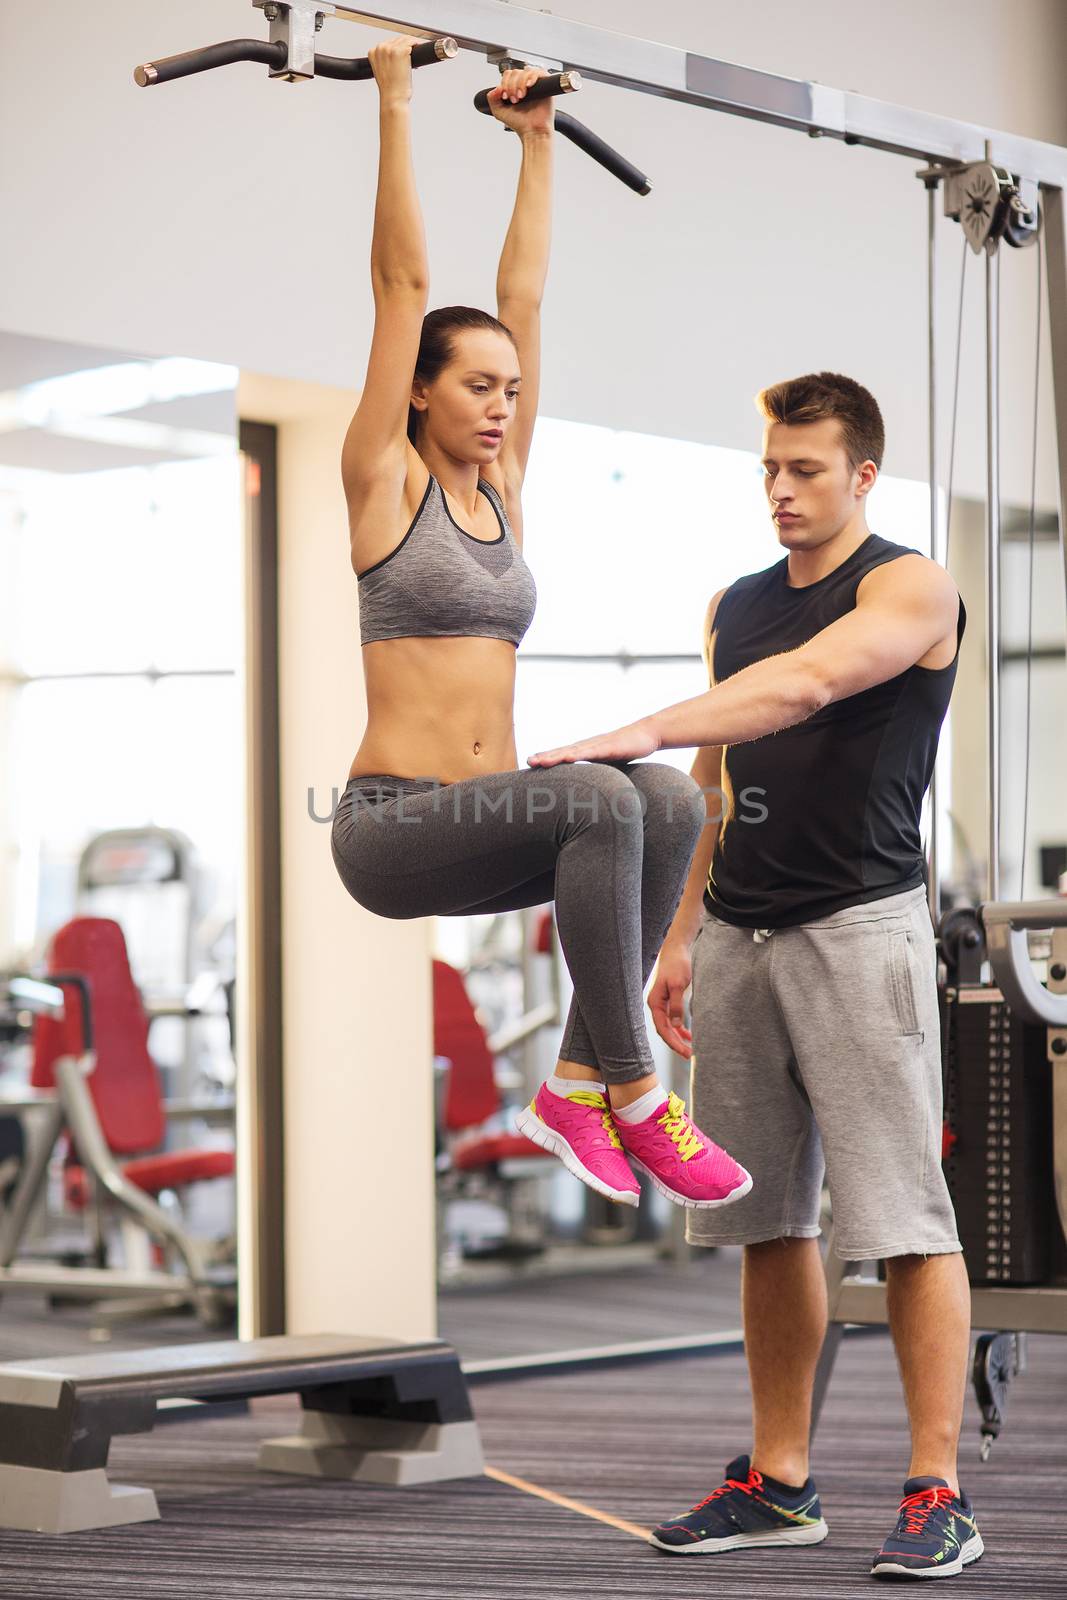 sport, fitness, lifestyle, teamwork and people concept - young woman with trainer hanging on bar and doing leg raises in gym